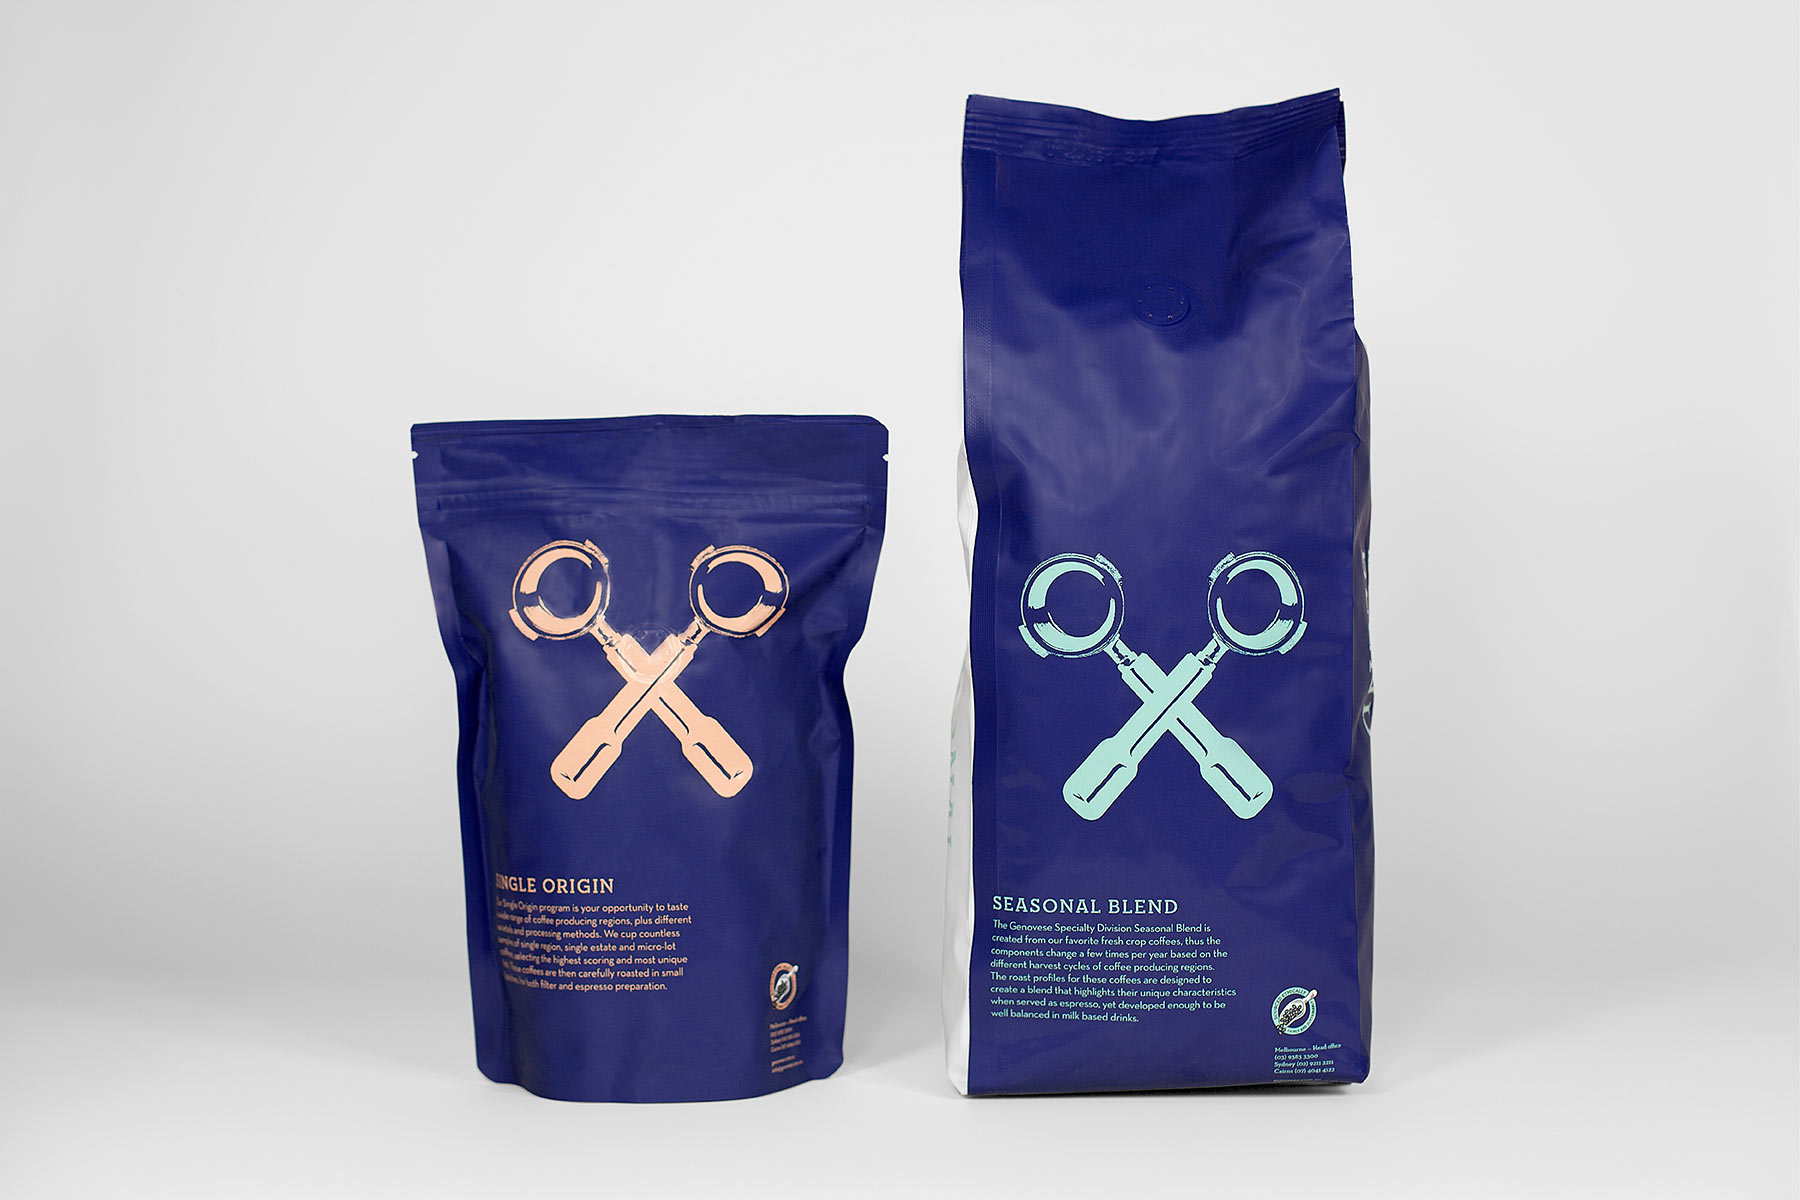 Genovese Specialty Division packaging